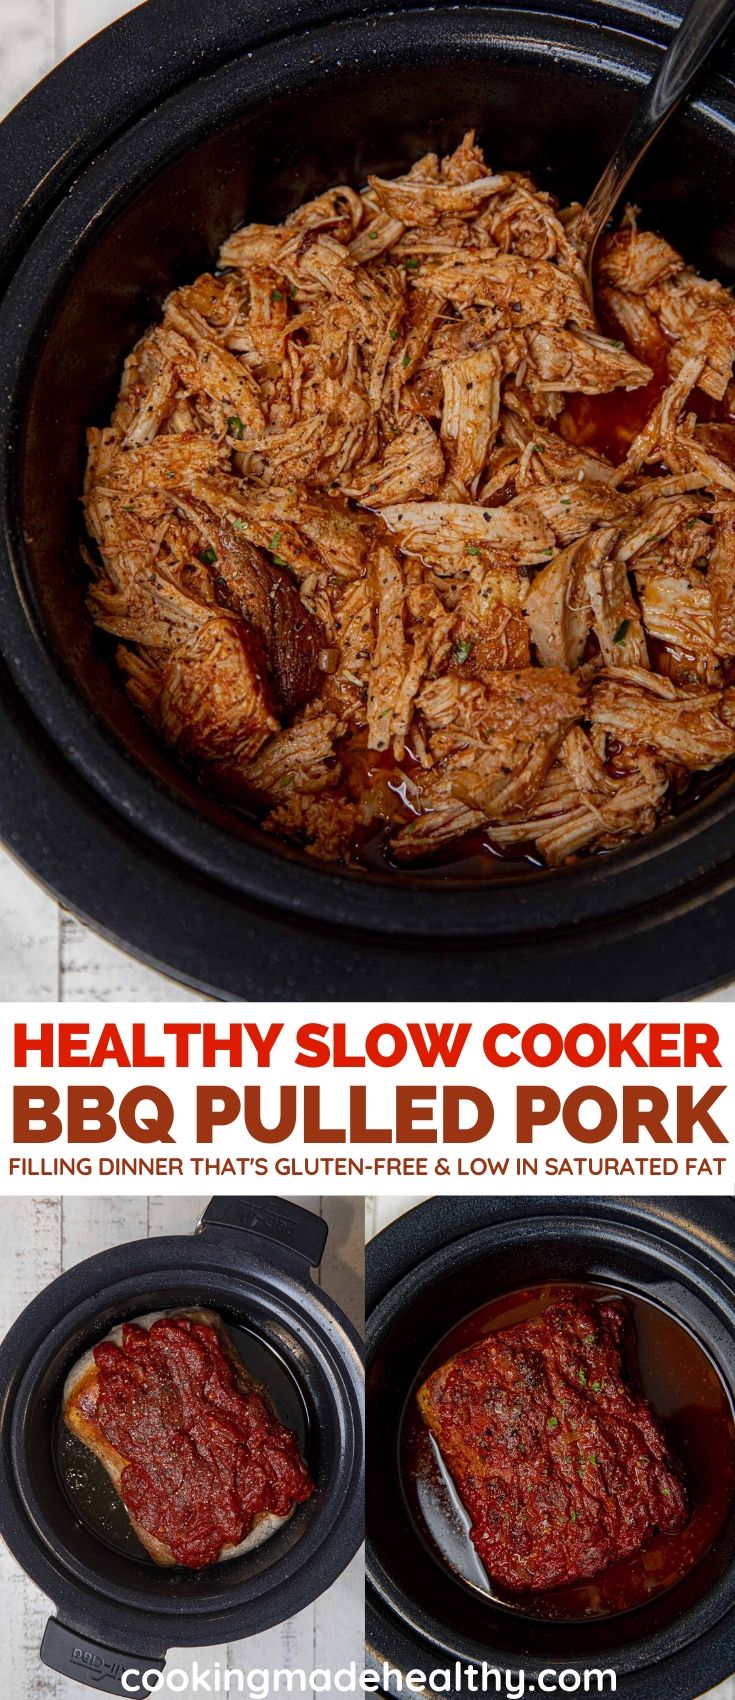 Healthy Slow Cooker BBQ Pulled Pork - Cooking Made Healthy